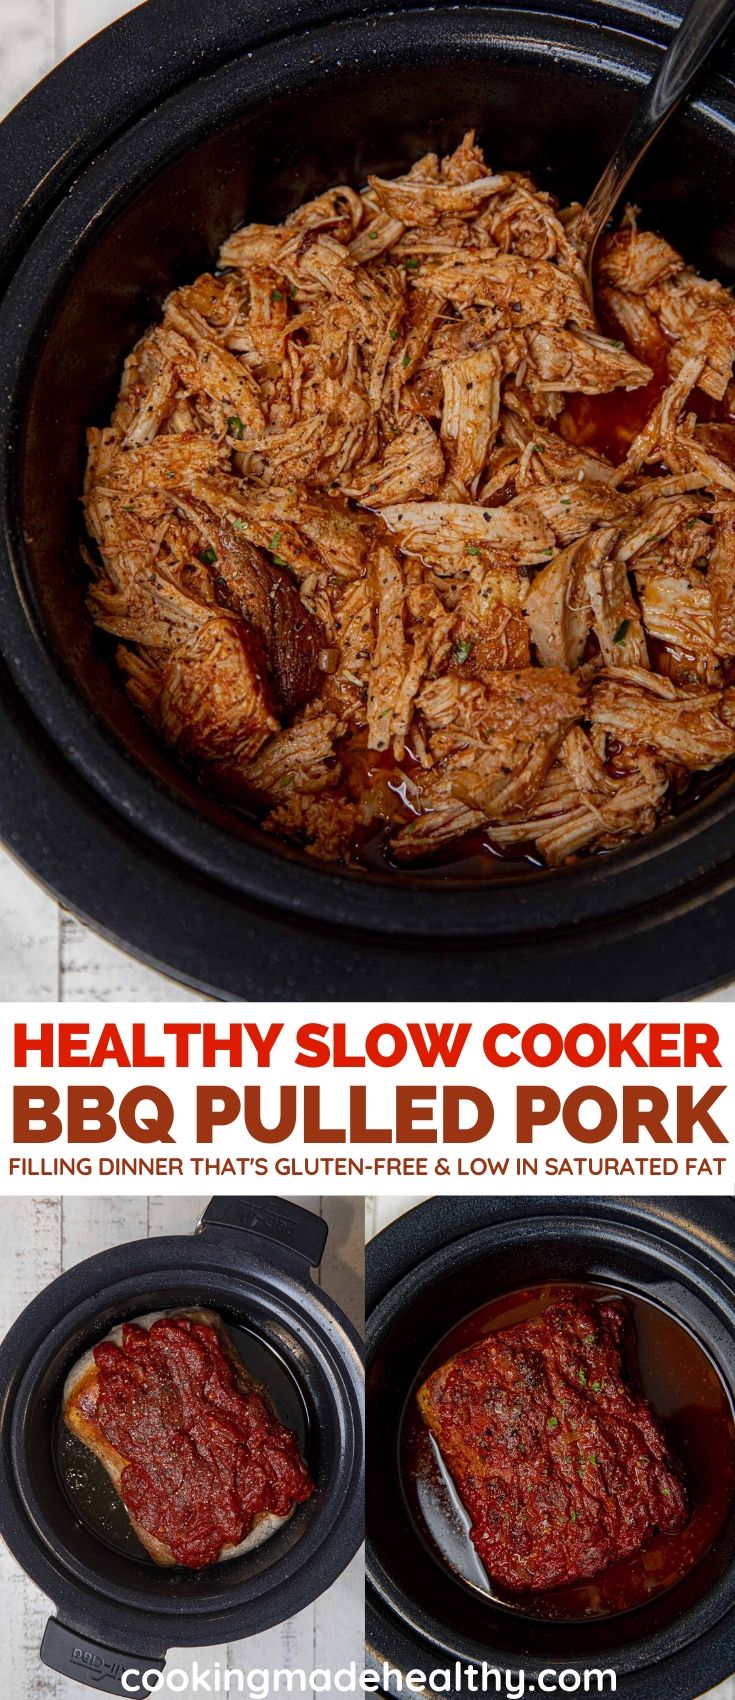 Healthy Slow Cooker BBQ Pulled Pork - Cooking Made Healthy